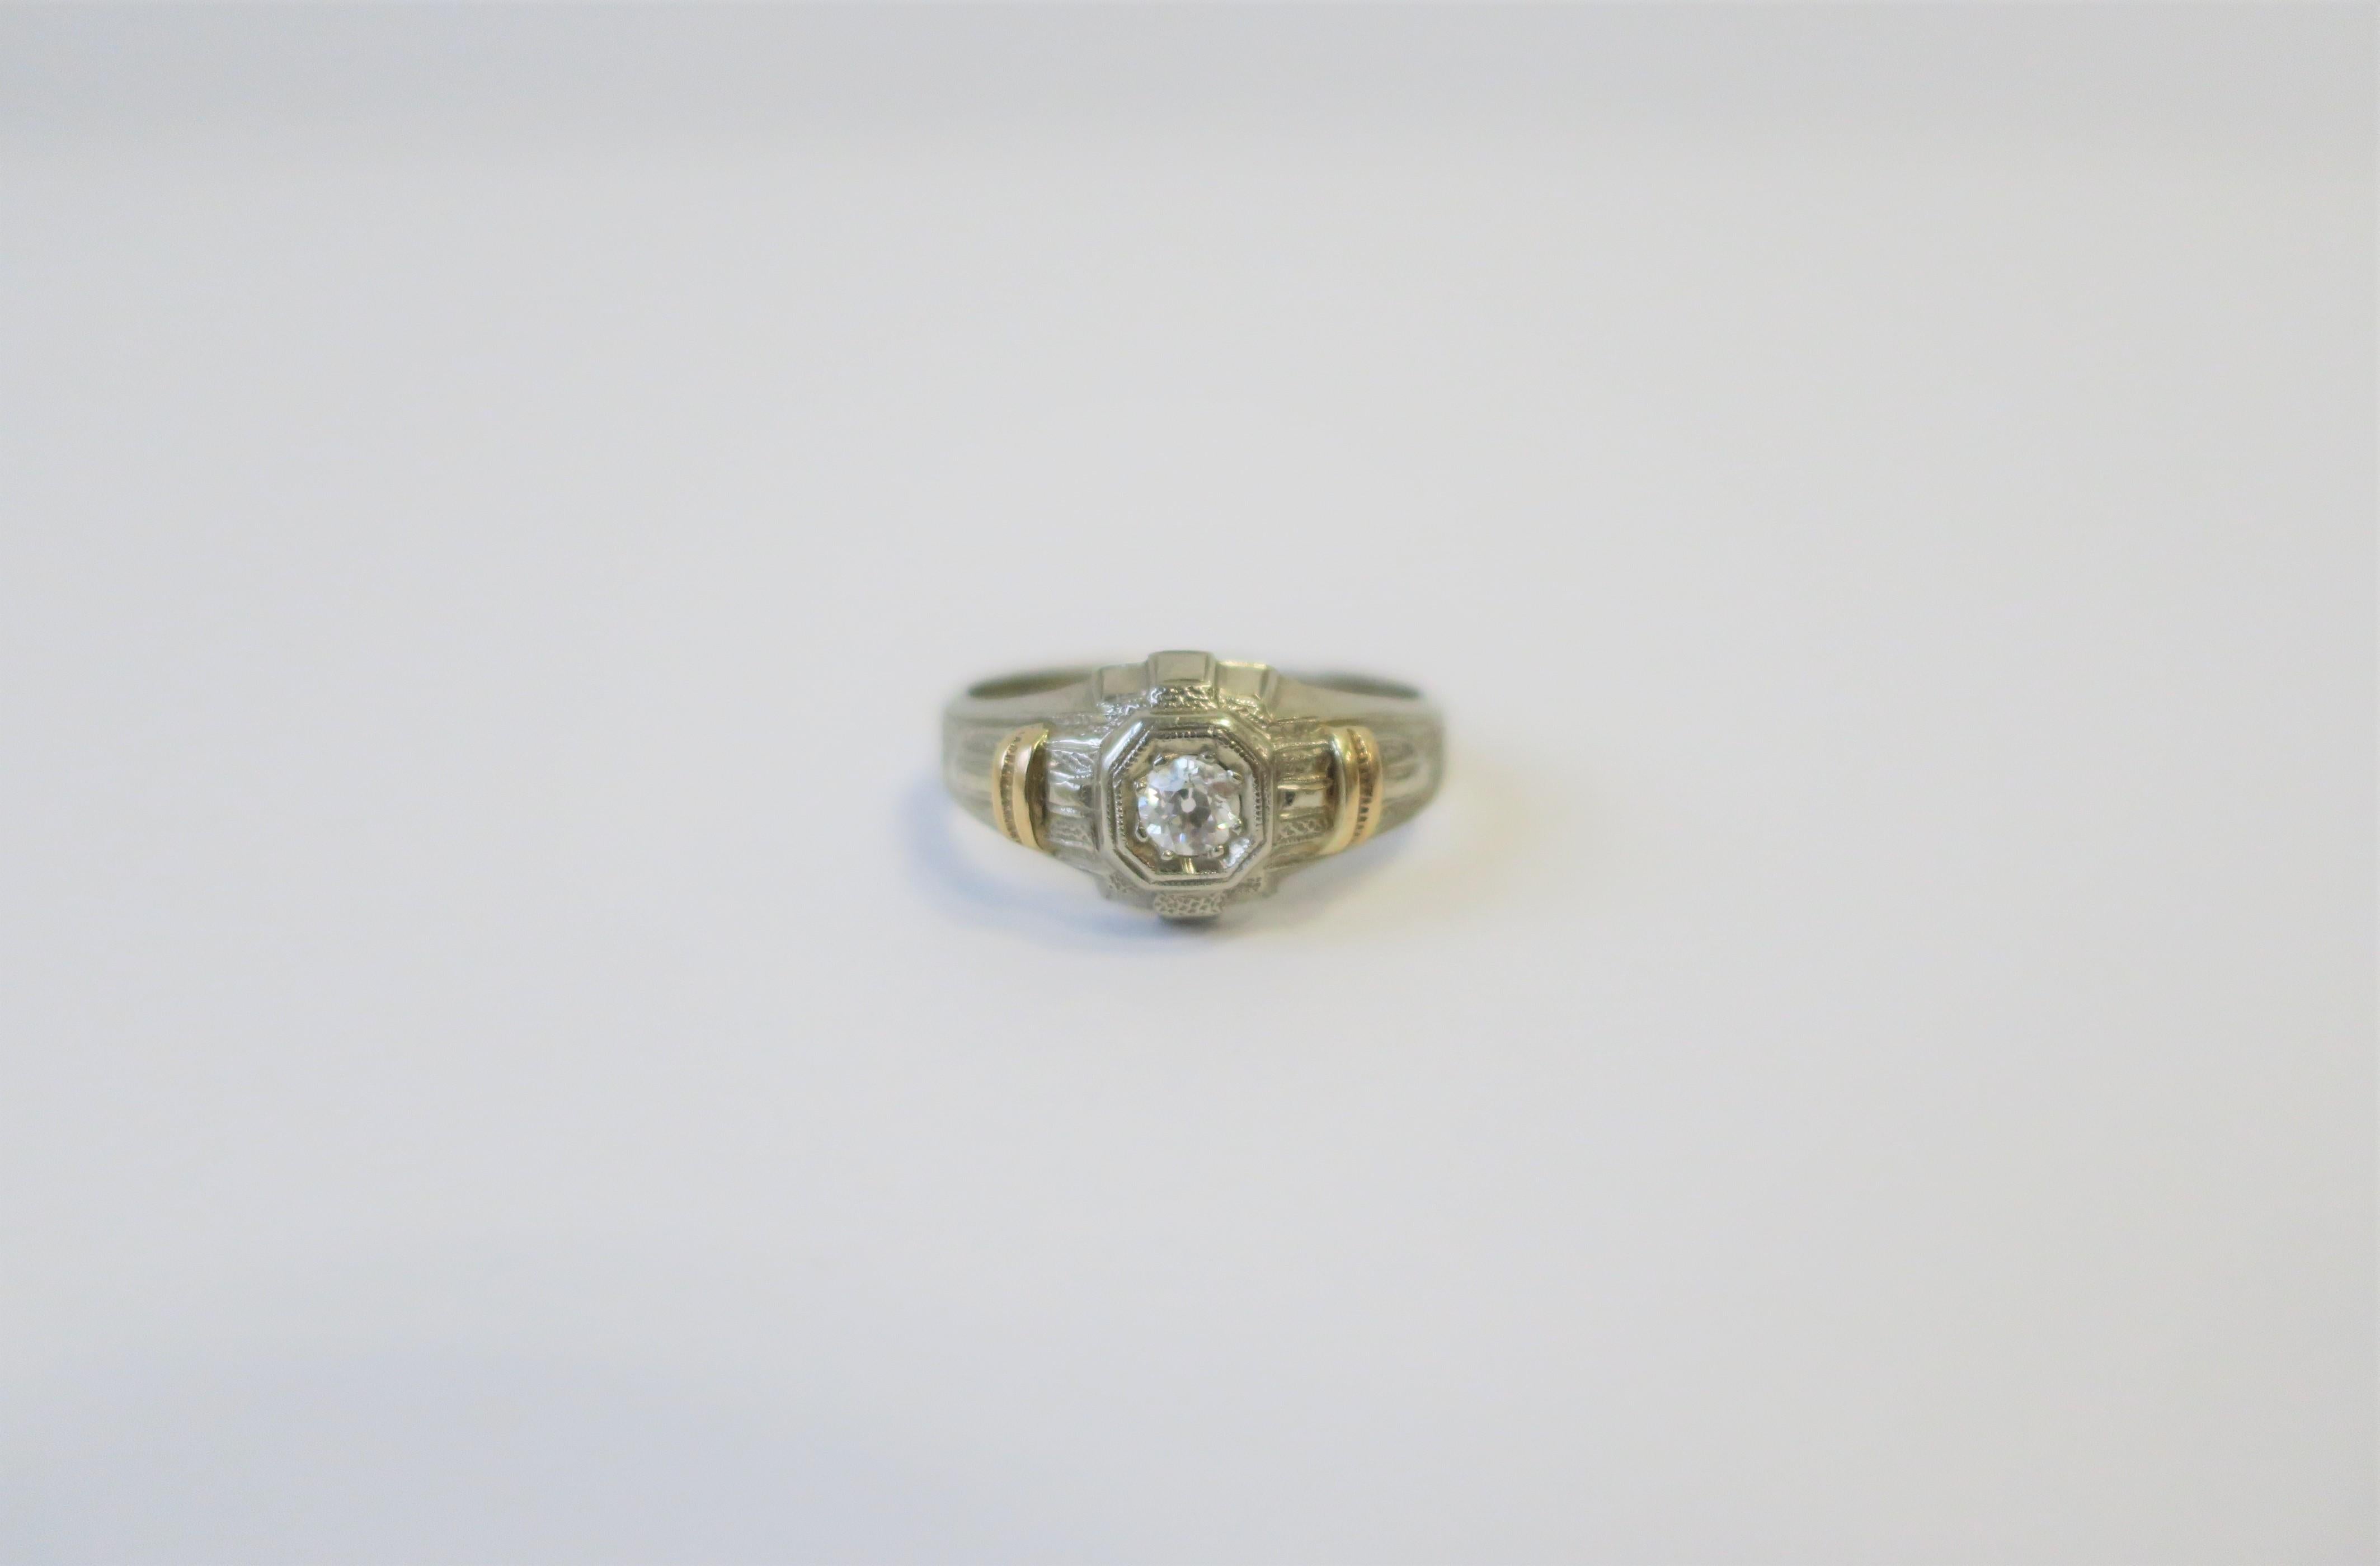 A beautiful Art Deco era/period diamond and 14-karat white & yellow gold men's ring, circa early 20th century, 1930s. Ring is a size 8.5, which can be adjusted by a professional jeweler. Diamond is a solitaire/round cut with beautiful clarity and